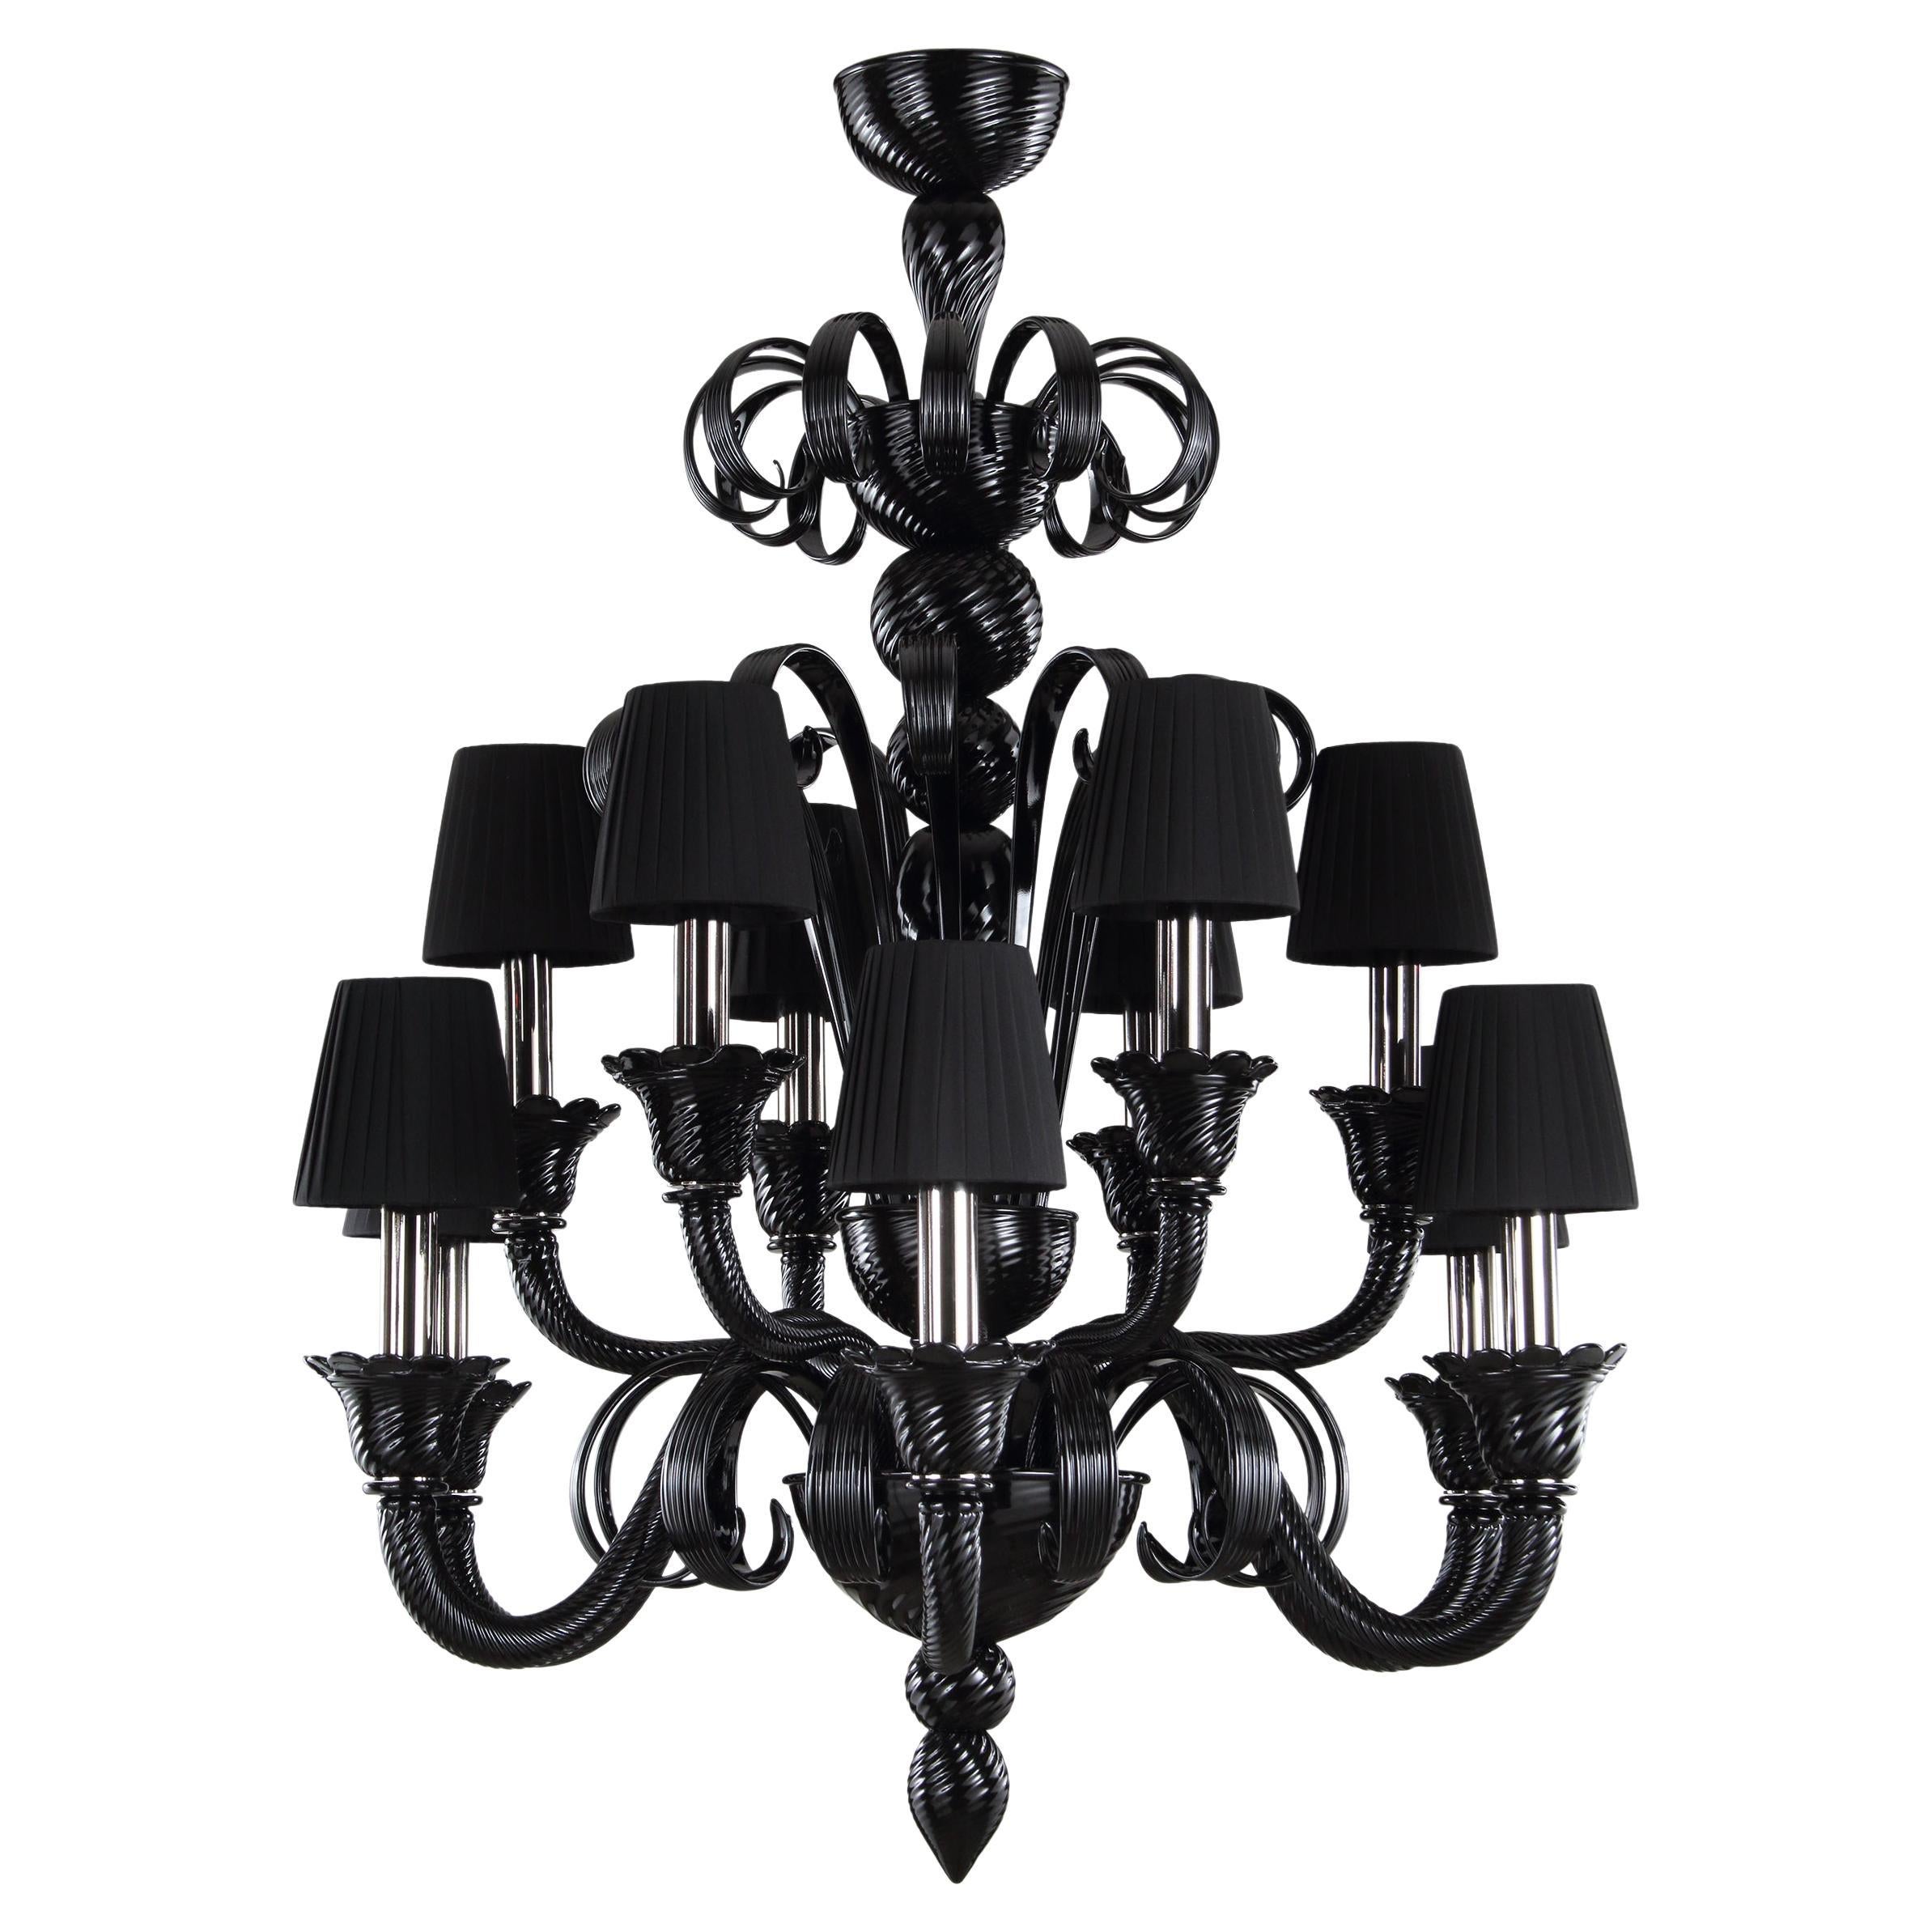 Artistic Chandelier 6+6 Arms Black Murano Glass, Lampshades IKO by Multiforme For Sale